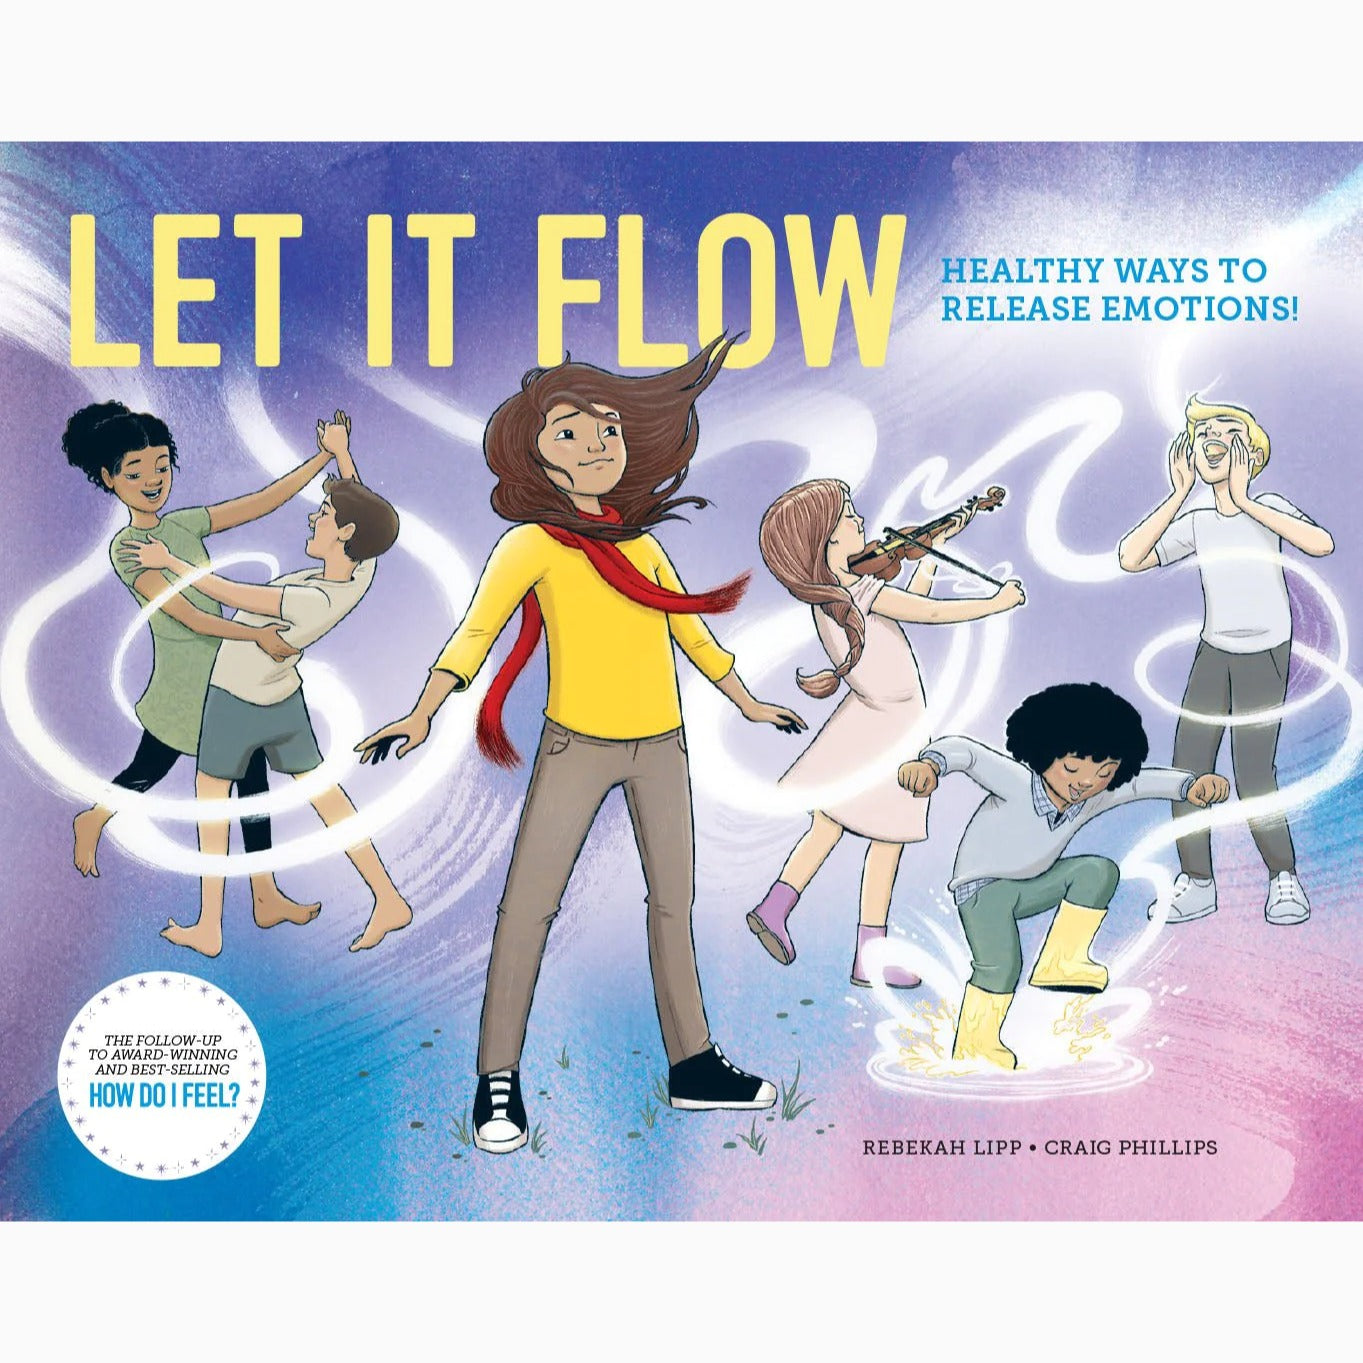 Let it Flow | Healthy Ways to Release Emotions from Rebekah Lipp & Craig Phillips available at Bear & Moo